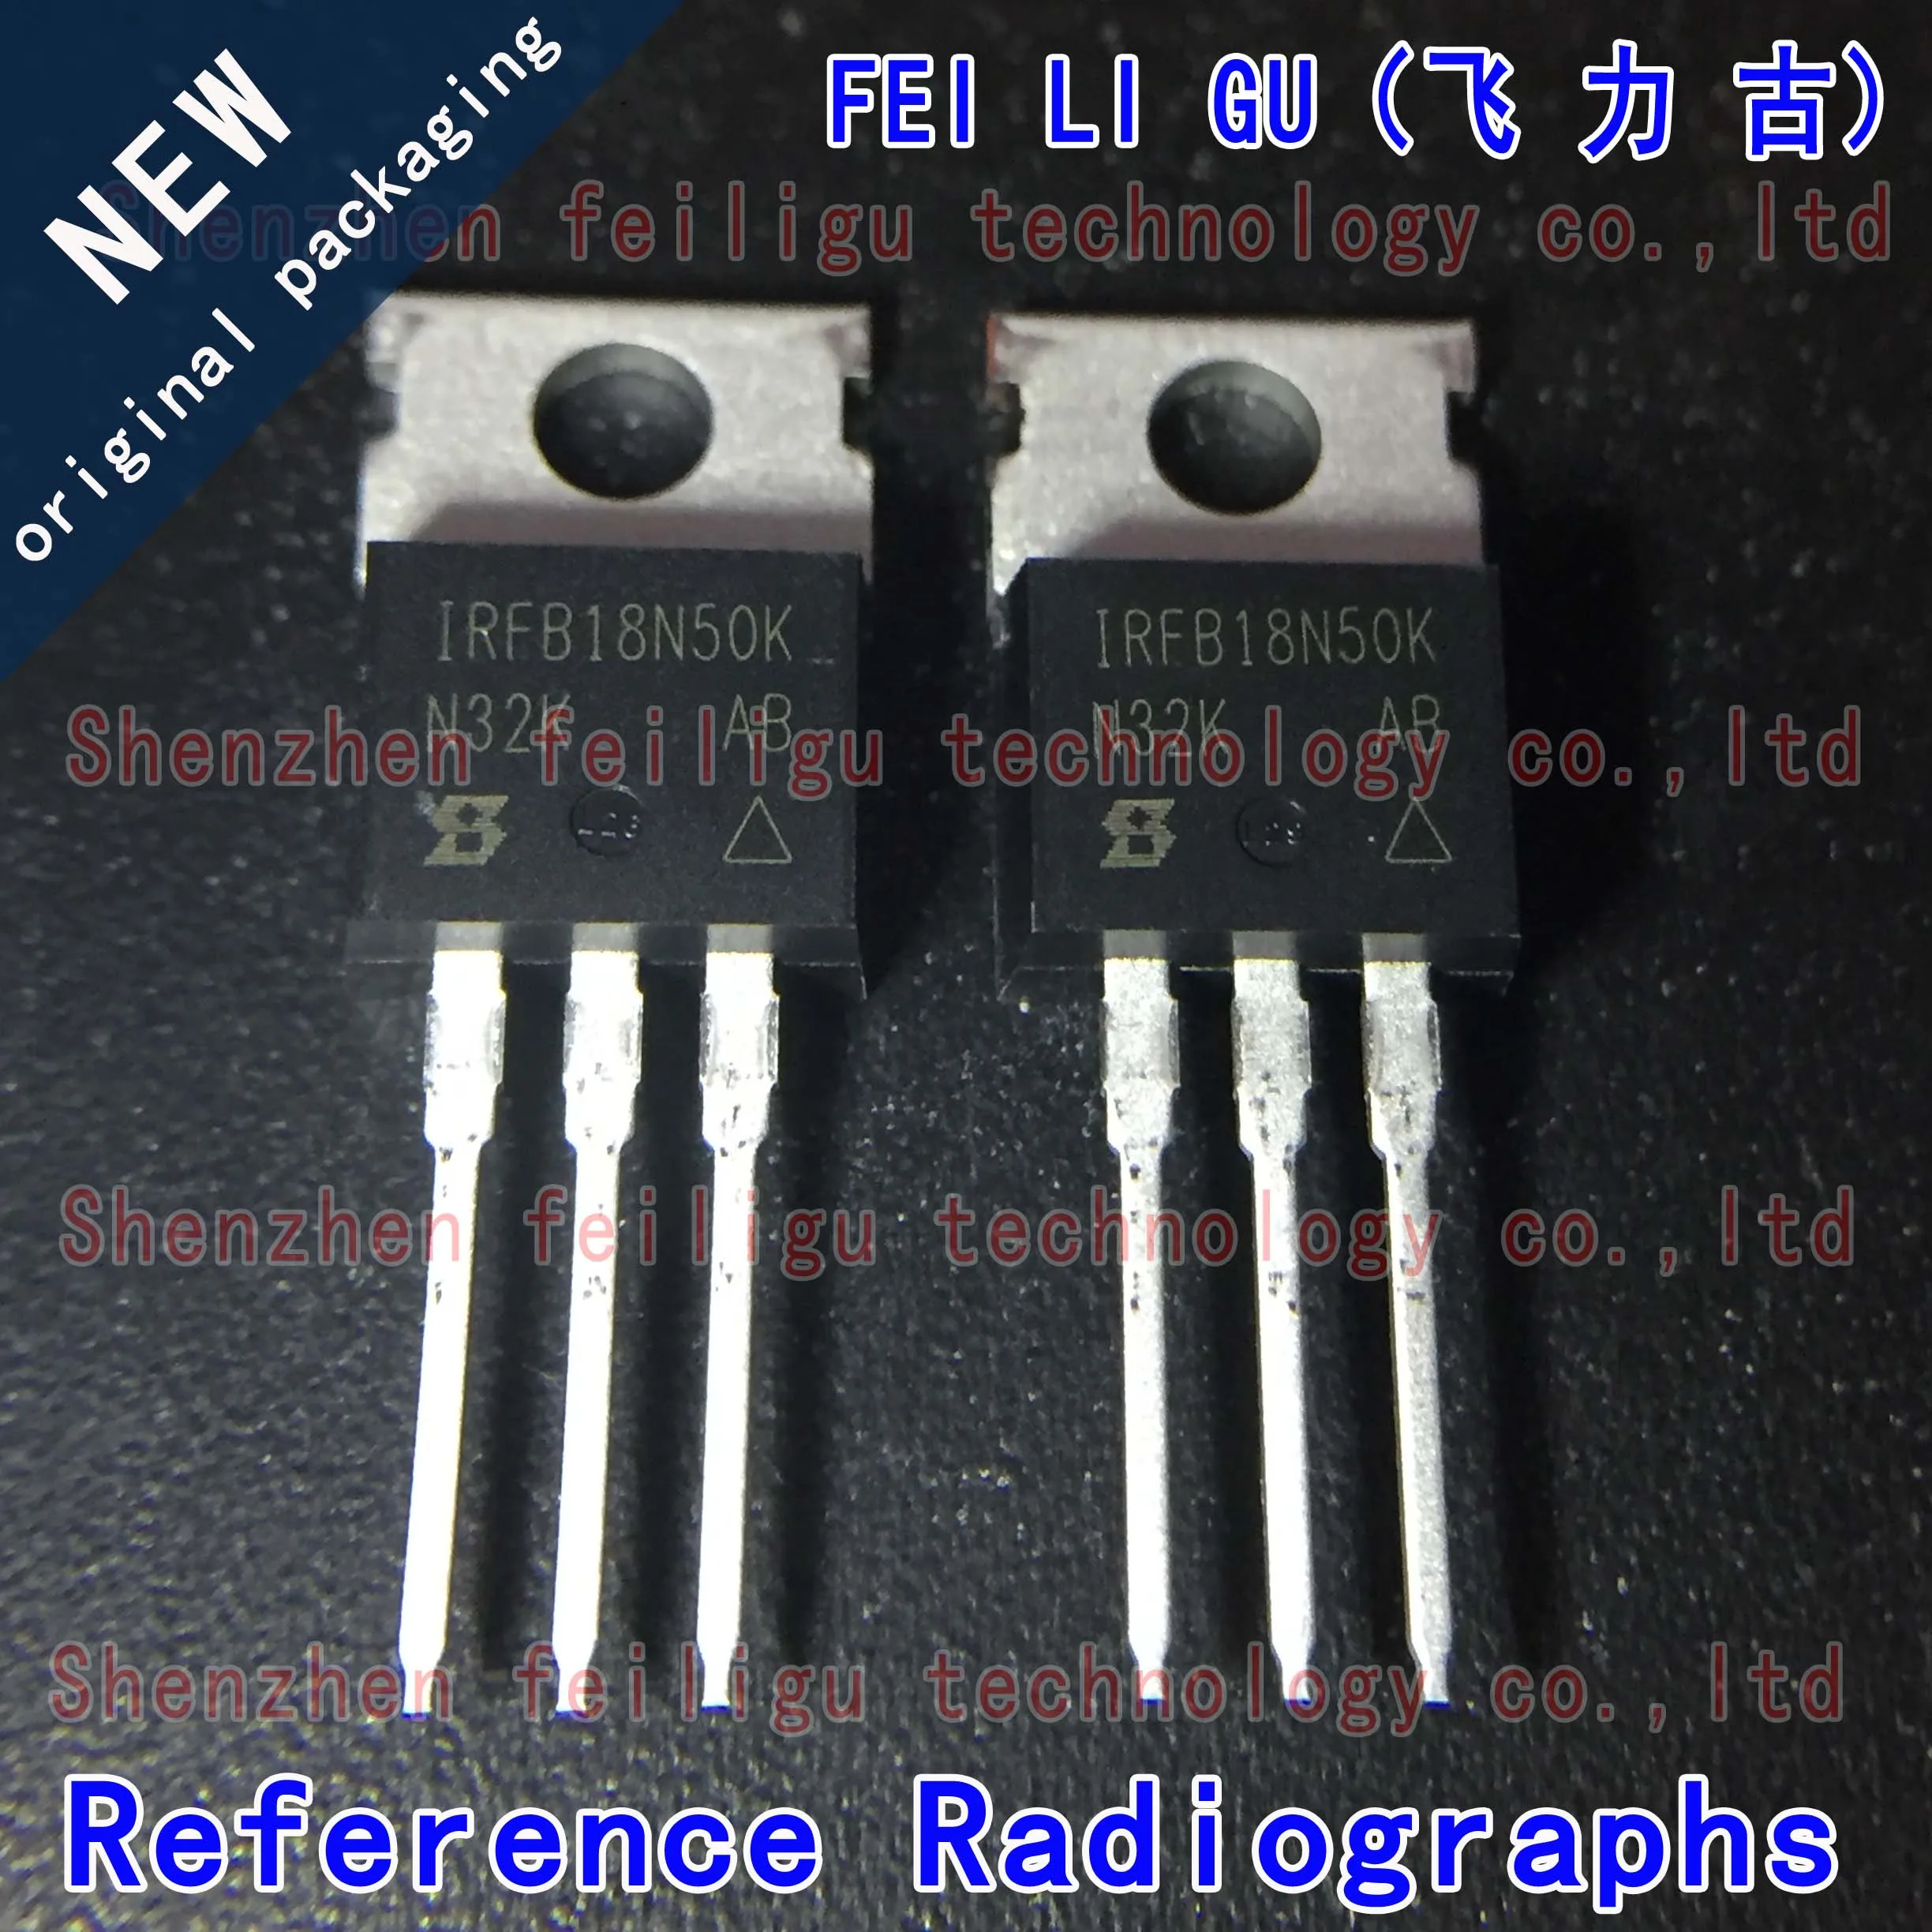 1~30PCS 100% New original IRFB18N50KPBF IRFB18N50K Package:TO-220 In-line Withstand Voltage:500V Current:17A N-channel MOS FET 2sb764 10pieces lot pnp withstand voltage 50v current 1a e 100 200 to92 brand new original stock